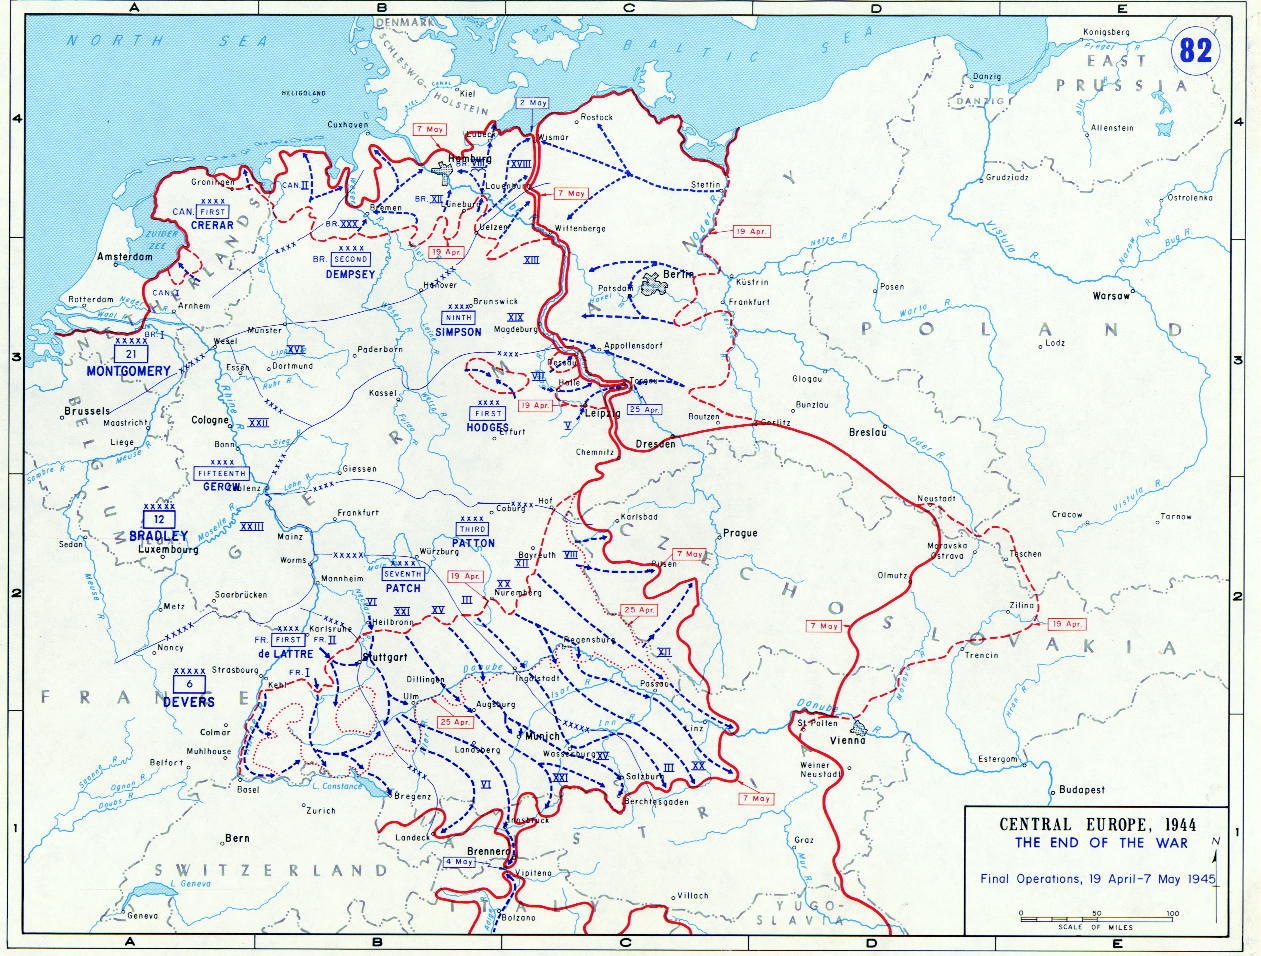 Map depicting the final campaign in Germany, 19 Apr-7 May 1945